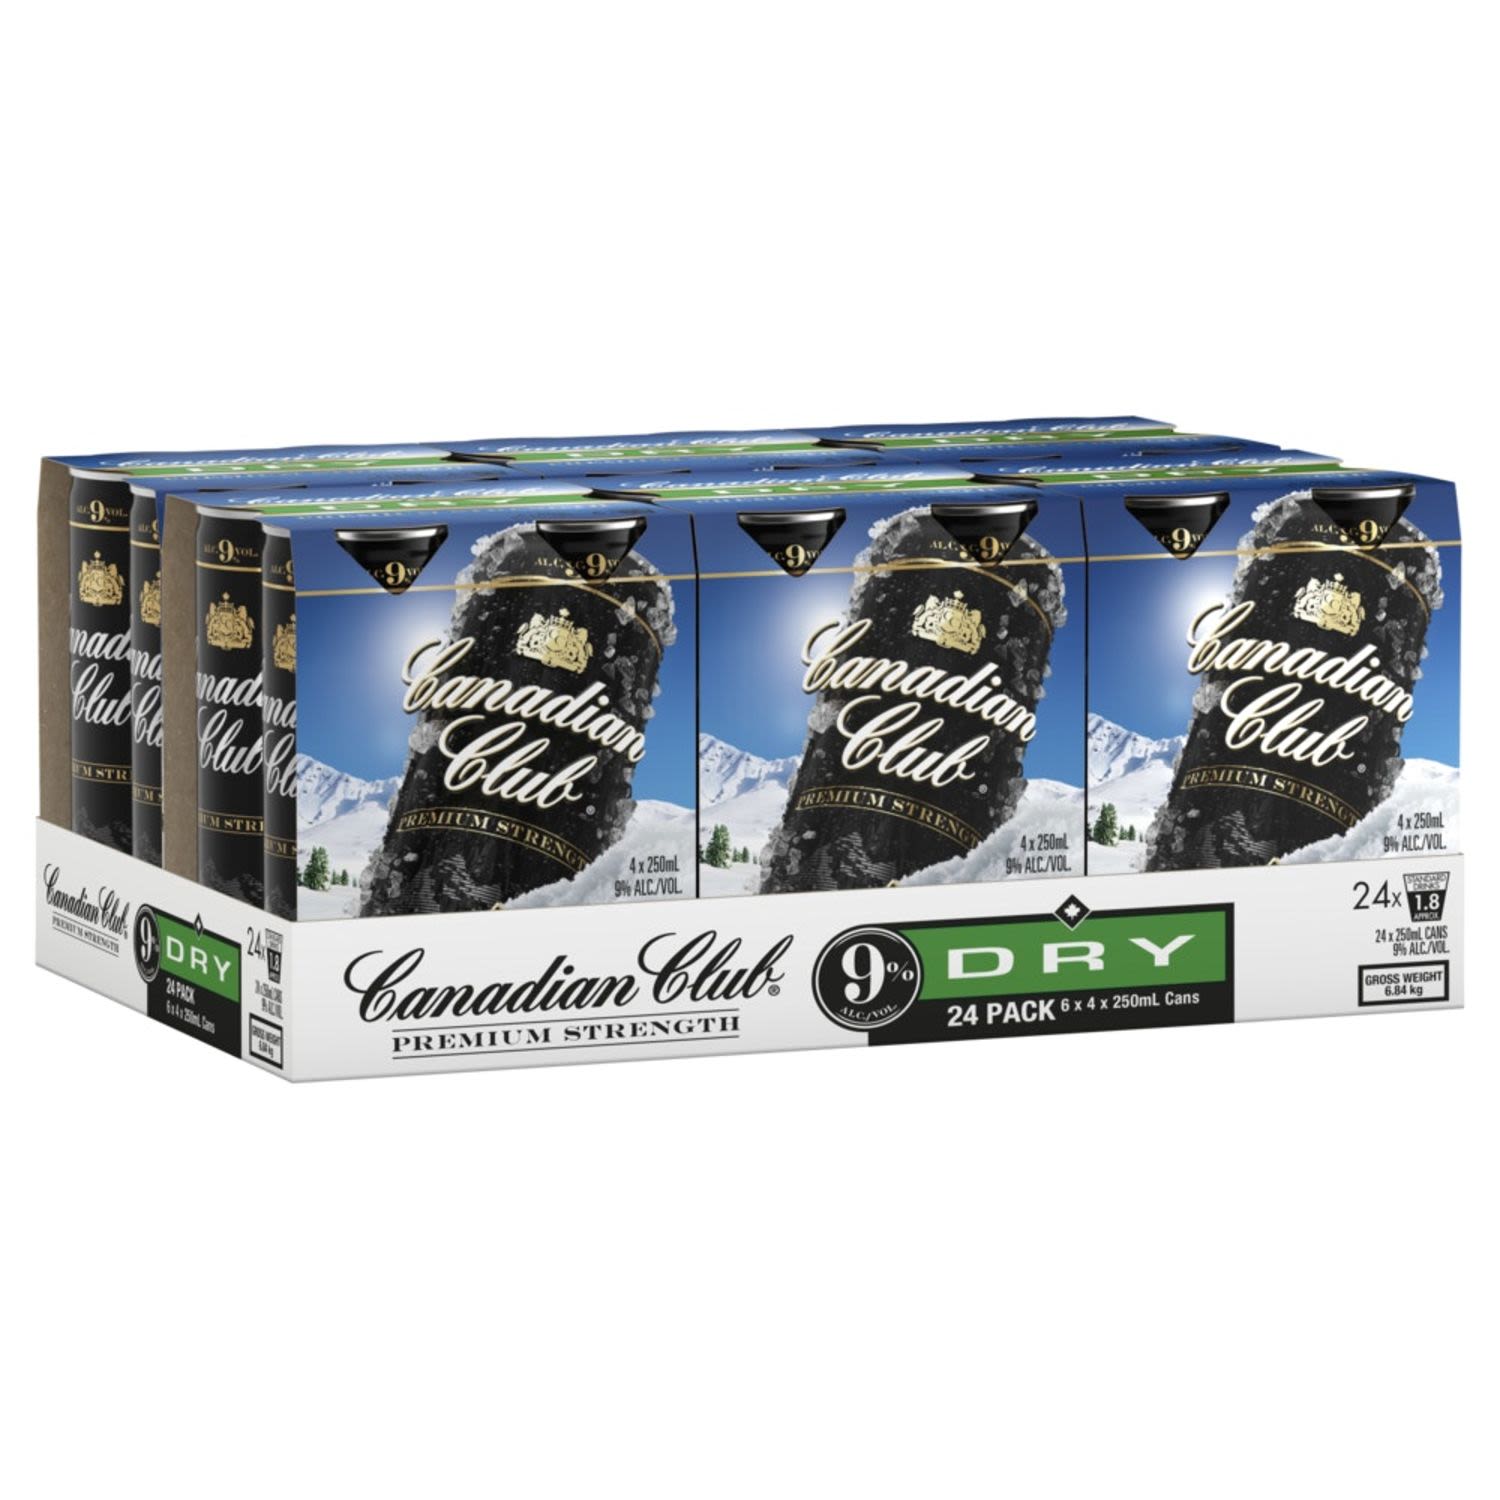 Canadian Club Dry Premium 9% has a smooth, fuller flavour, mixed with a less sweet dry ginger ale. Enjoy chilled or poured over ice for the ultimate refreshment.<br /> <br />Alcohol Volume: 9.00%<br /><br />Pack Format: 24 Pack<br /><br />Standard Drinks: 1.8</br /><br />Pack Type: Can<br />